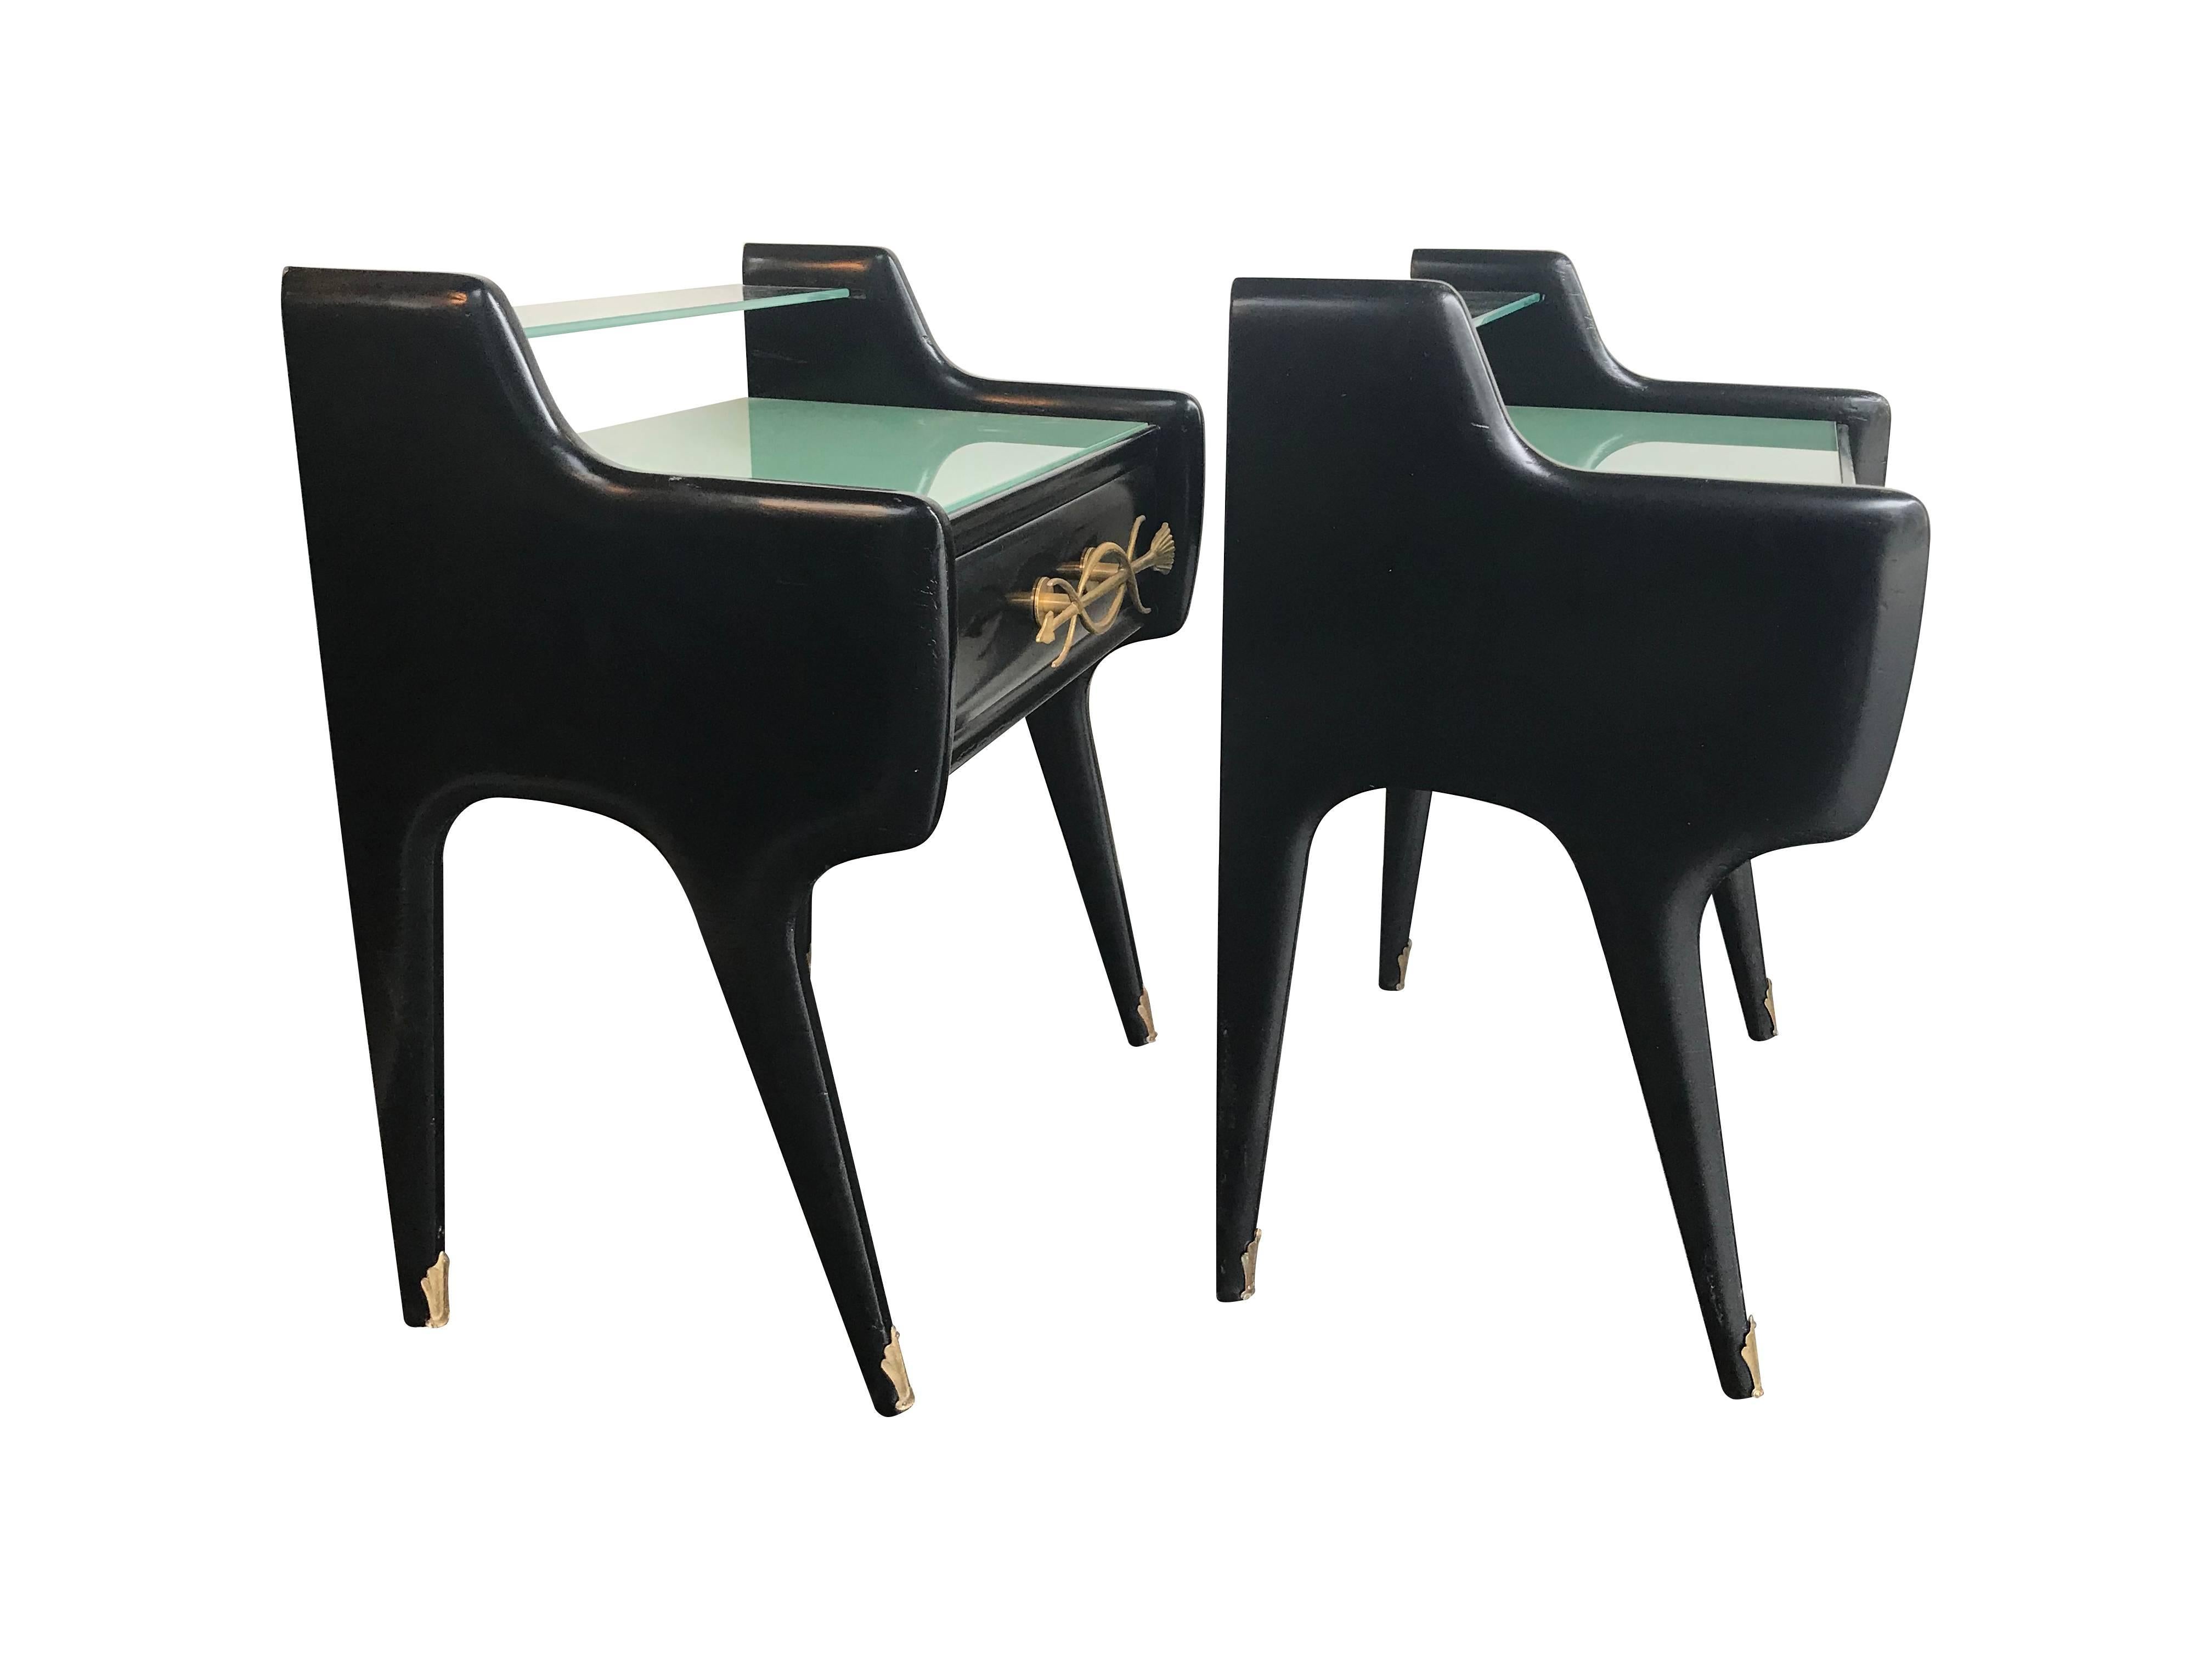 A pair of Italian 1950s ebonized bedside tables with a single drawer in each, with ornate arrow motif, gilt metal handles. Each with green frosted glass top, clear glass top shelf and brass ormolu leg plates.